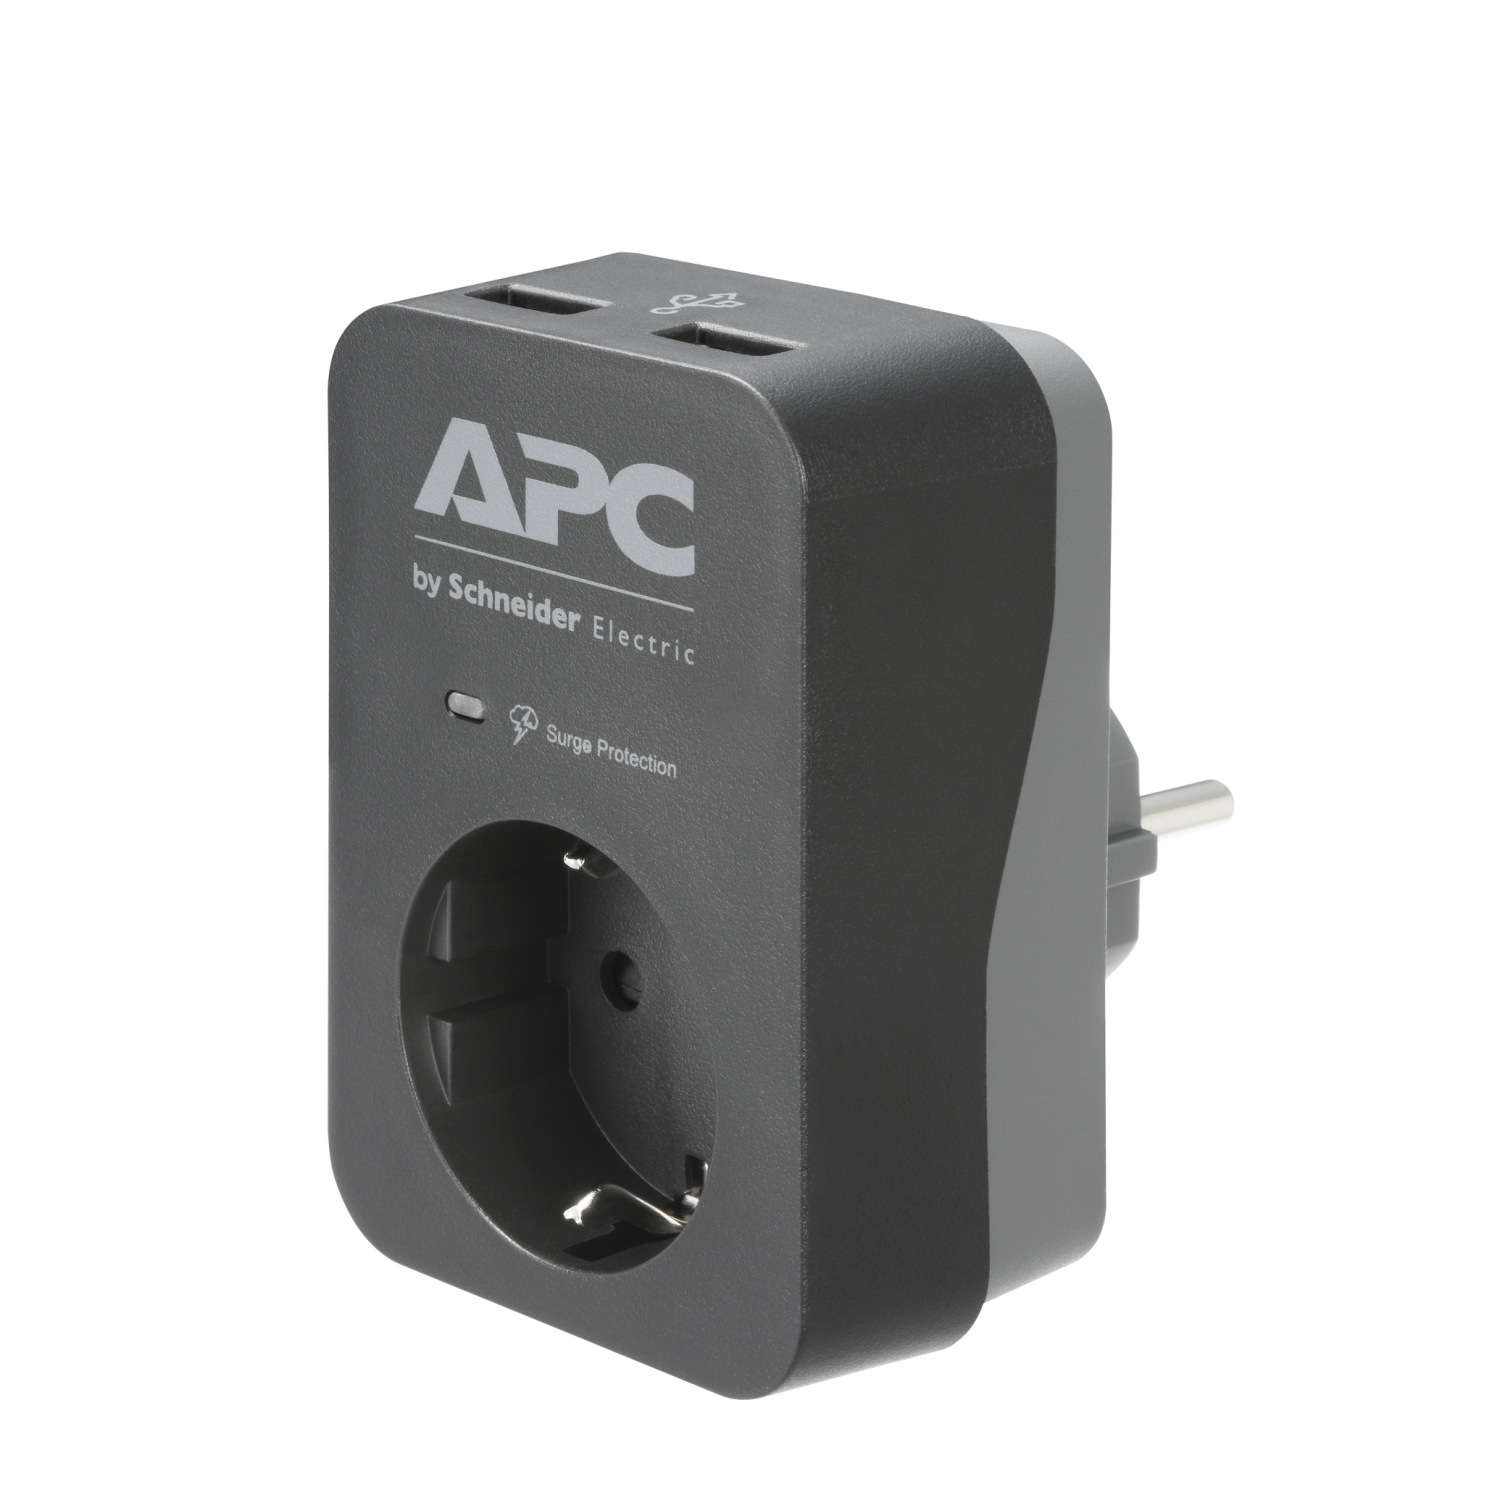 Photos - Surge Protector / Extension Lead APC PME1WU2B-GR surge protector Black, Grey 1 AC outlet(s) 230 V 